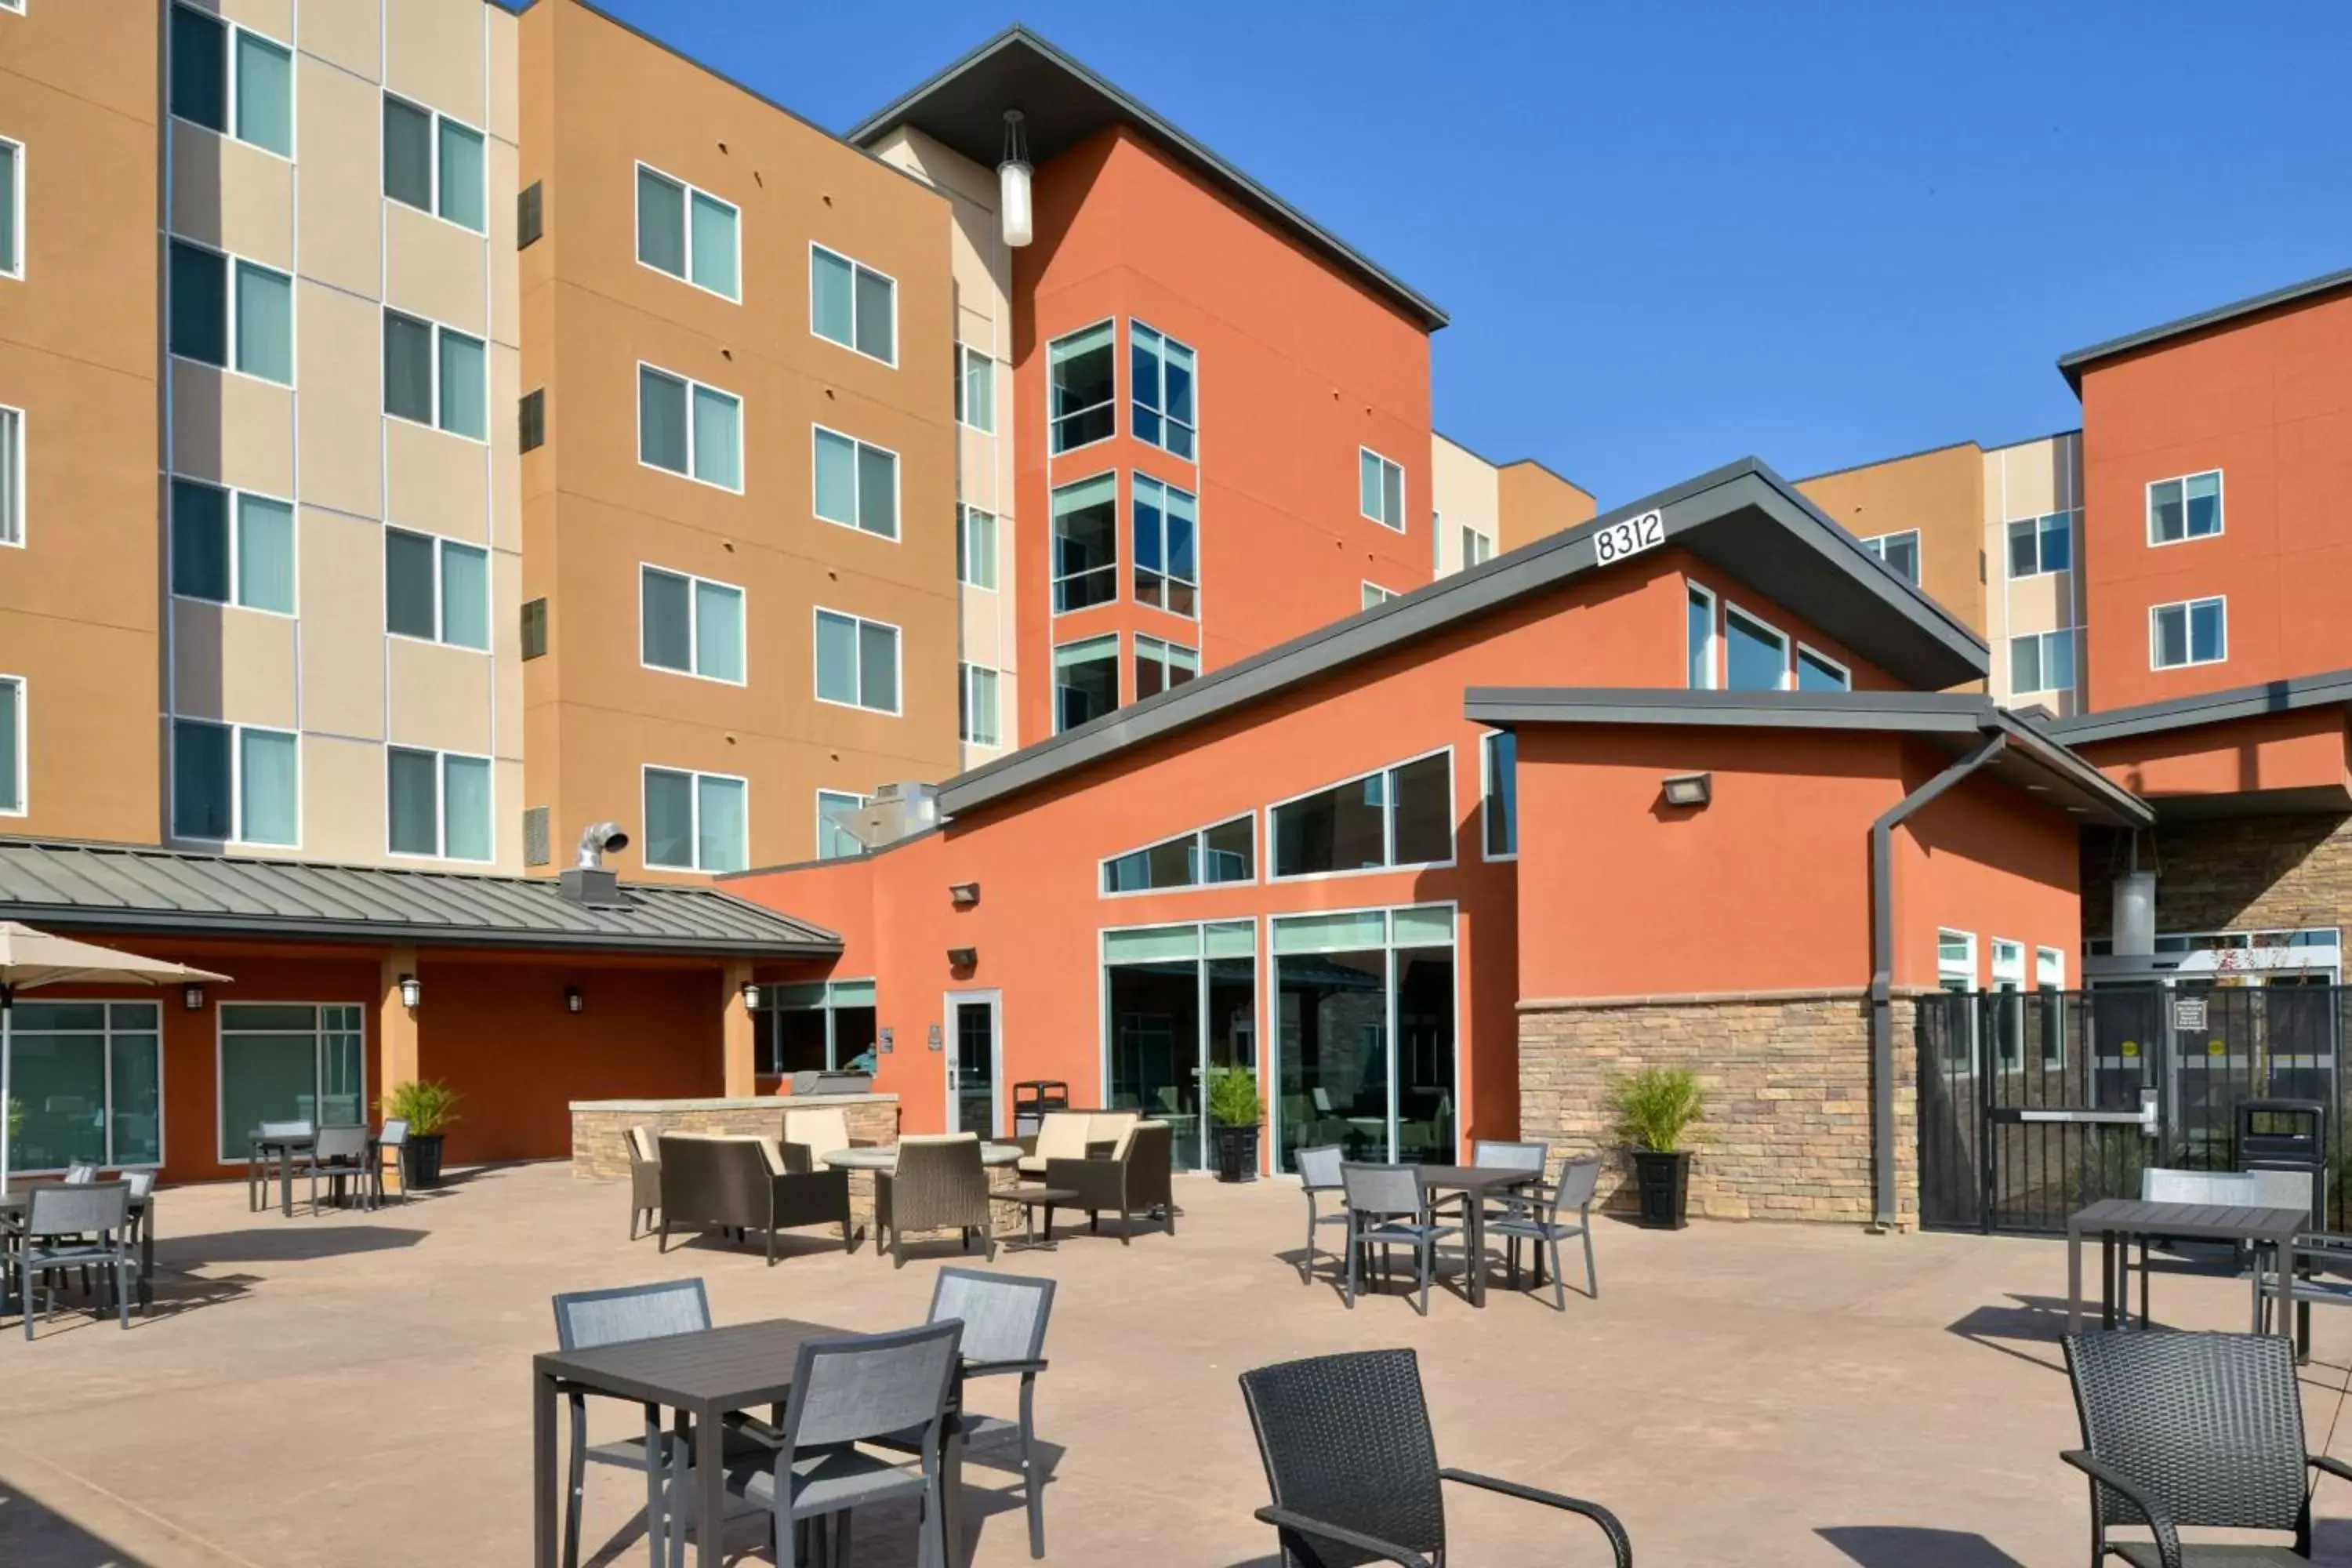 Other, Property Building in Residence Inn by Marriott Bakersfield West